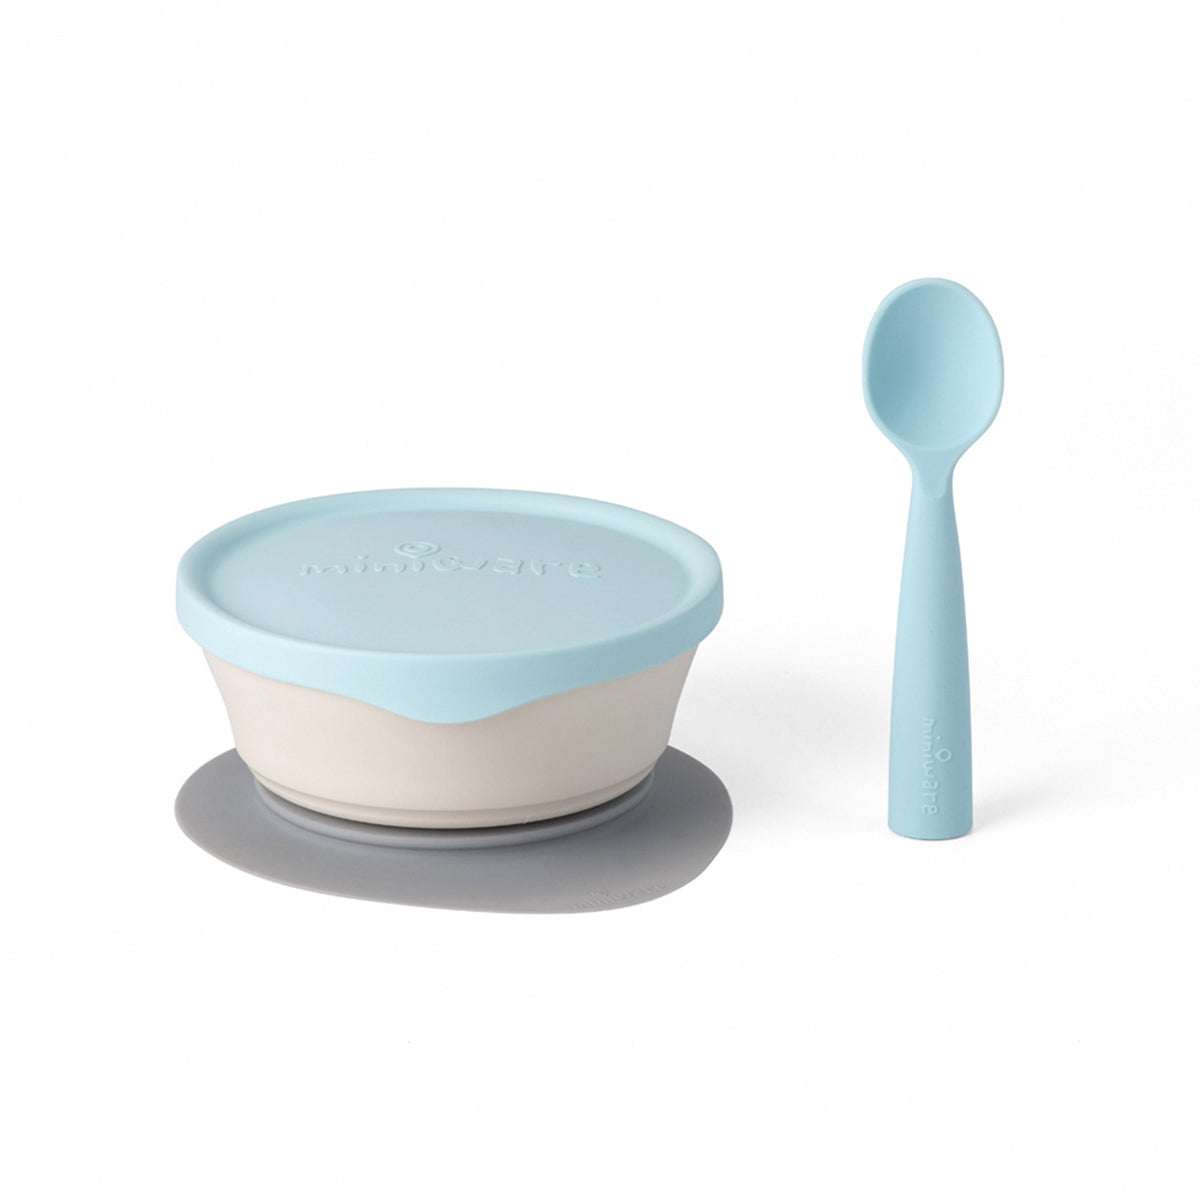 miniware-first-bite-set-pla-cereal-suction-bowl-vanilla-silicone-spoon-and-cover-in-aqua- (2)